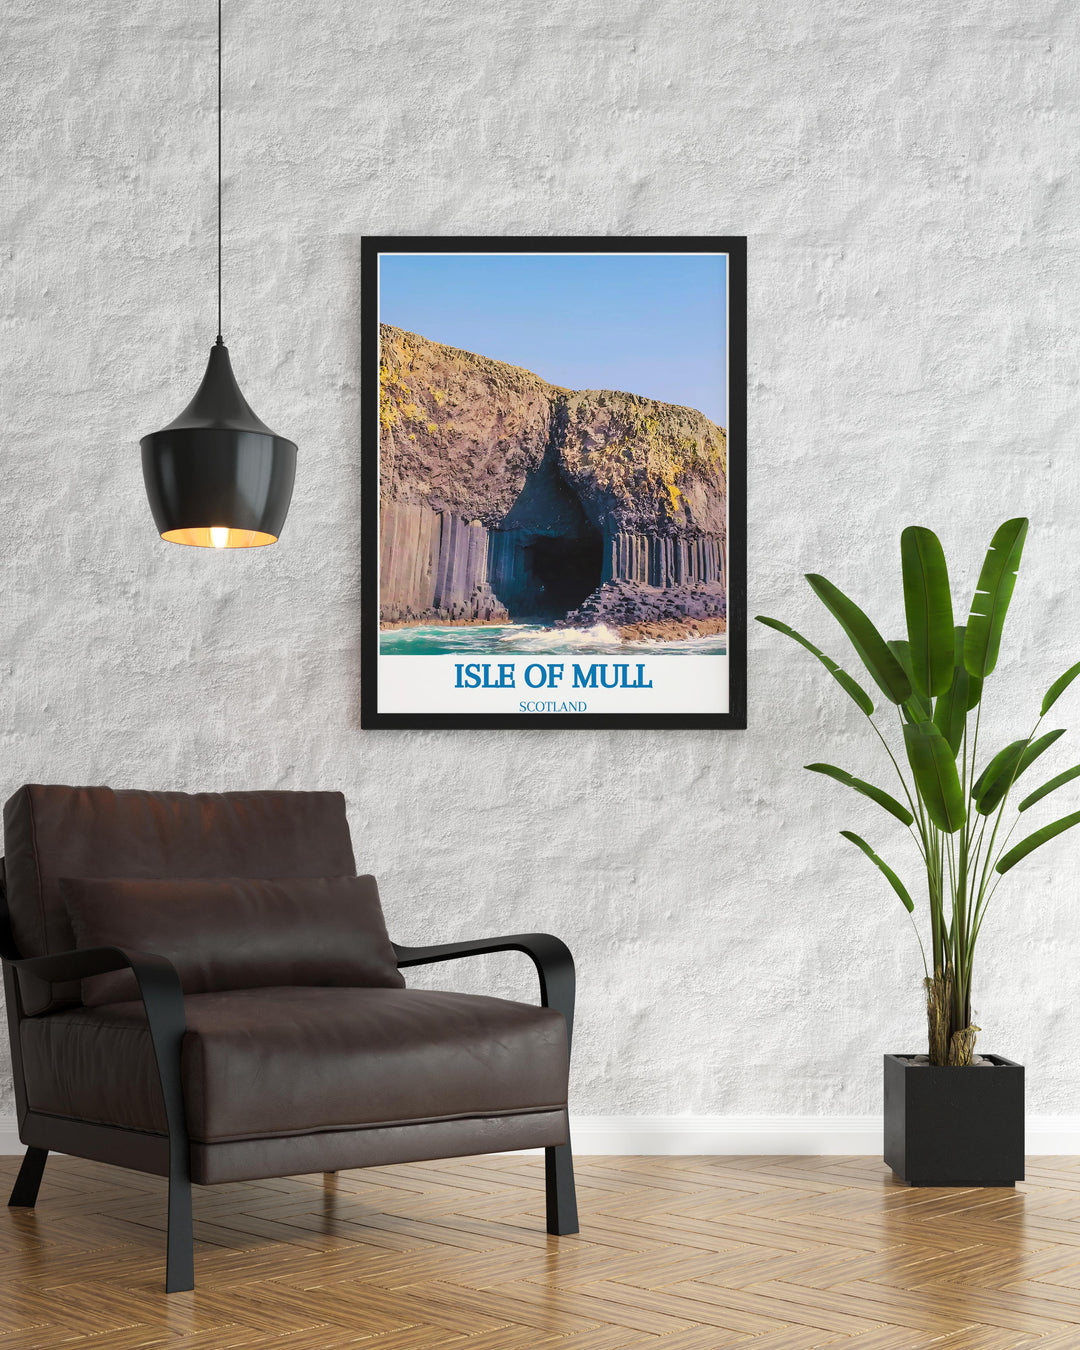 Fine art print illustrating the dynamic coastlines of Mull ideal for collectors and admirers of Scottish island beauty